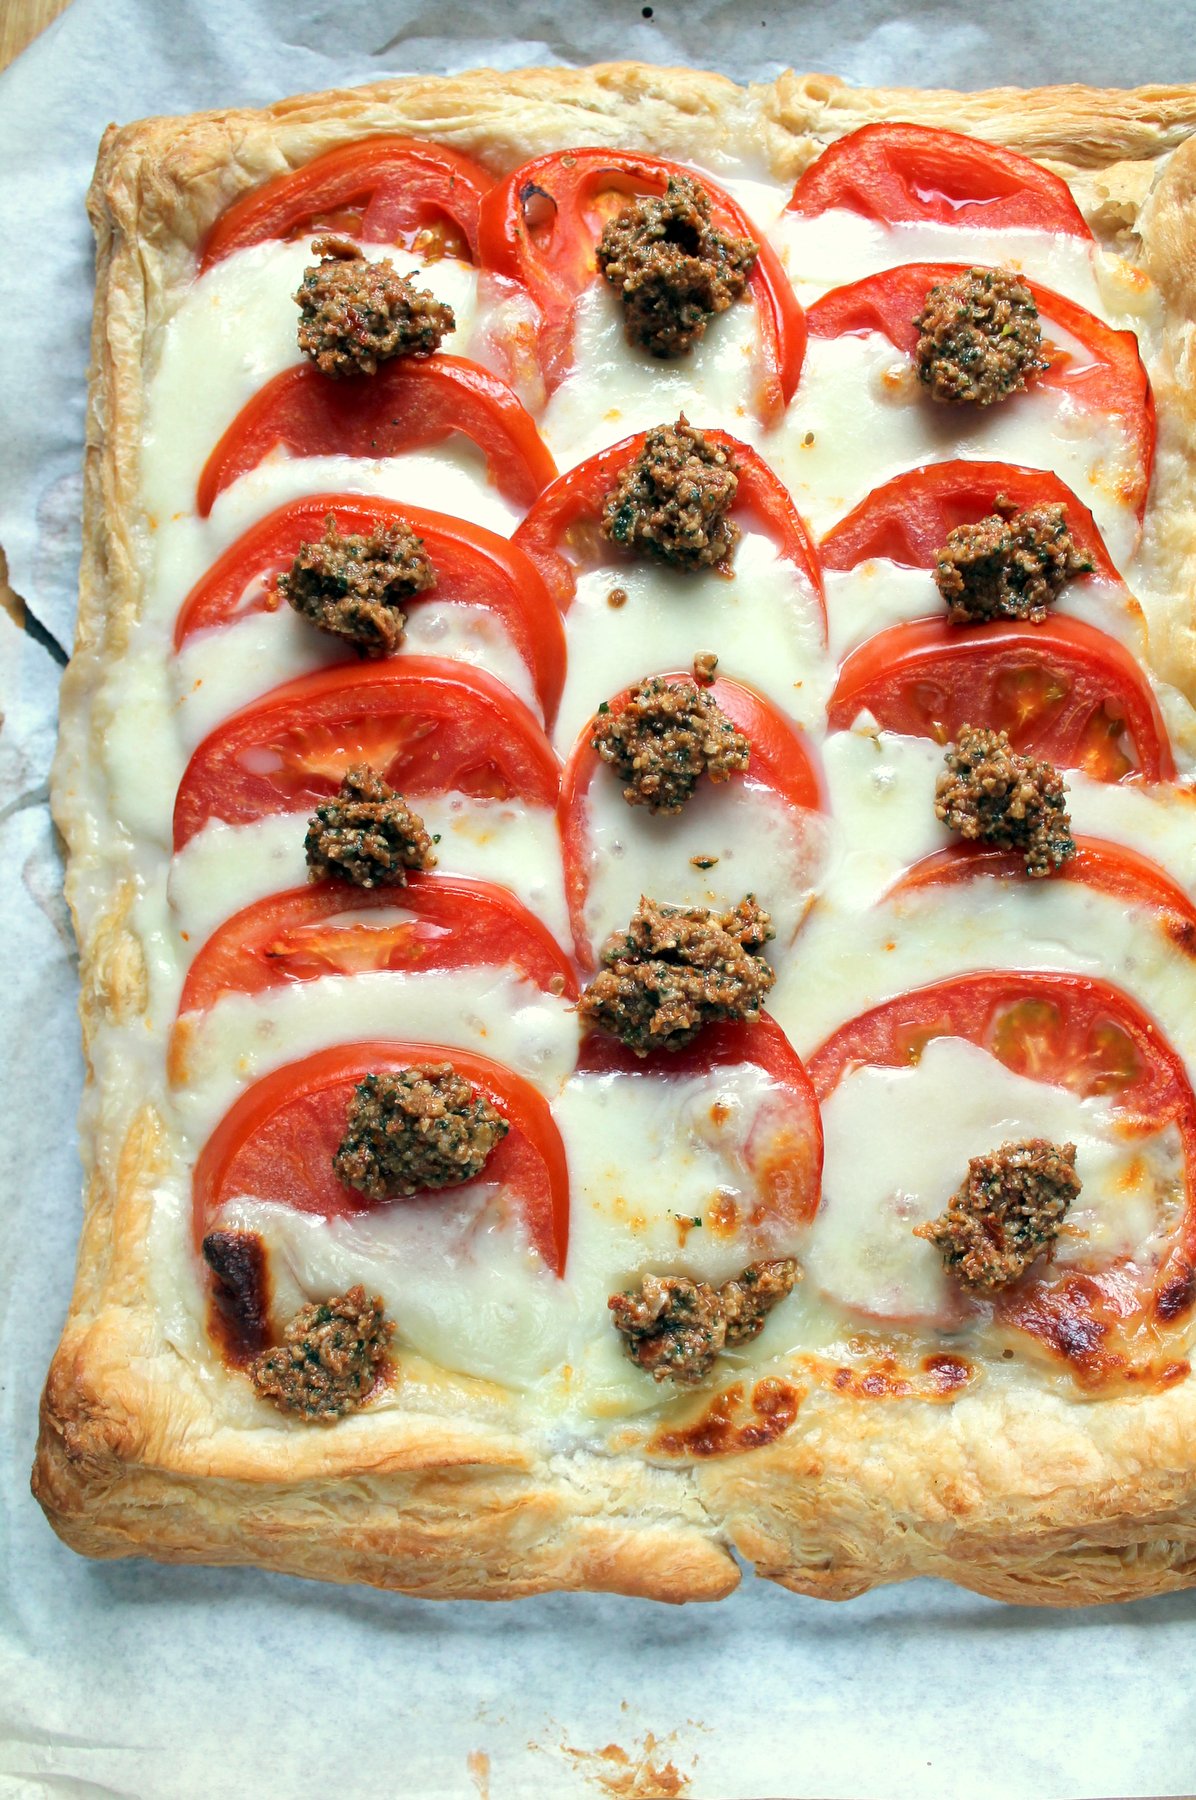 Utterly delicious vegetarian tart. Everyone loves a tomato mozzarella combo, but the dollops of this pesto make it extra special.